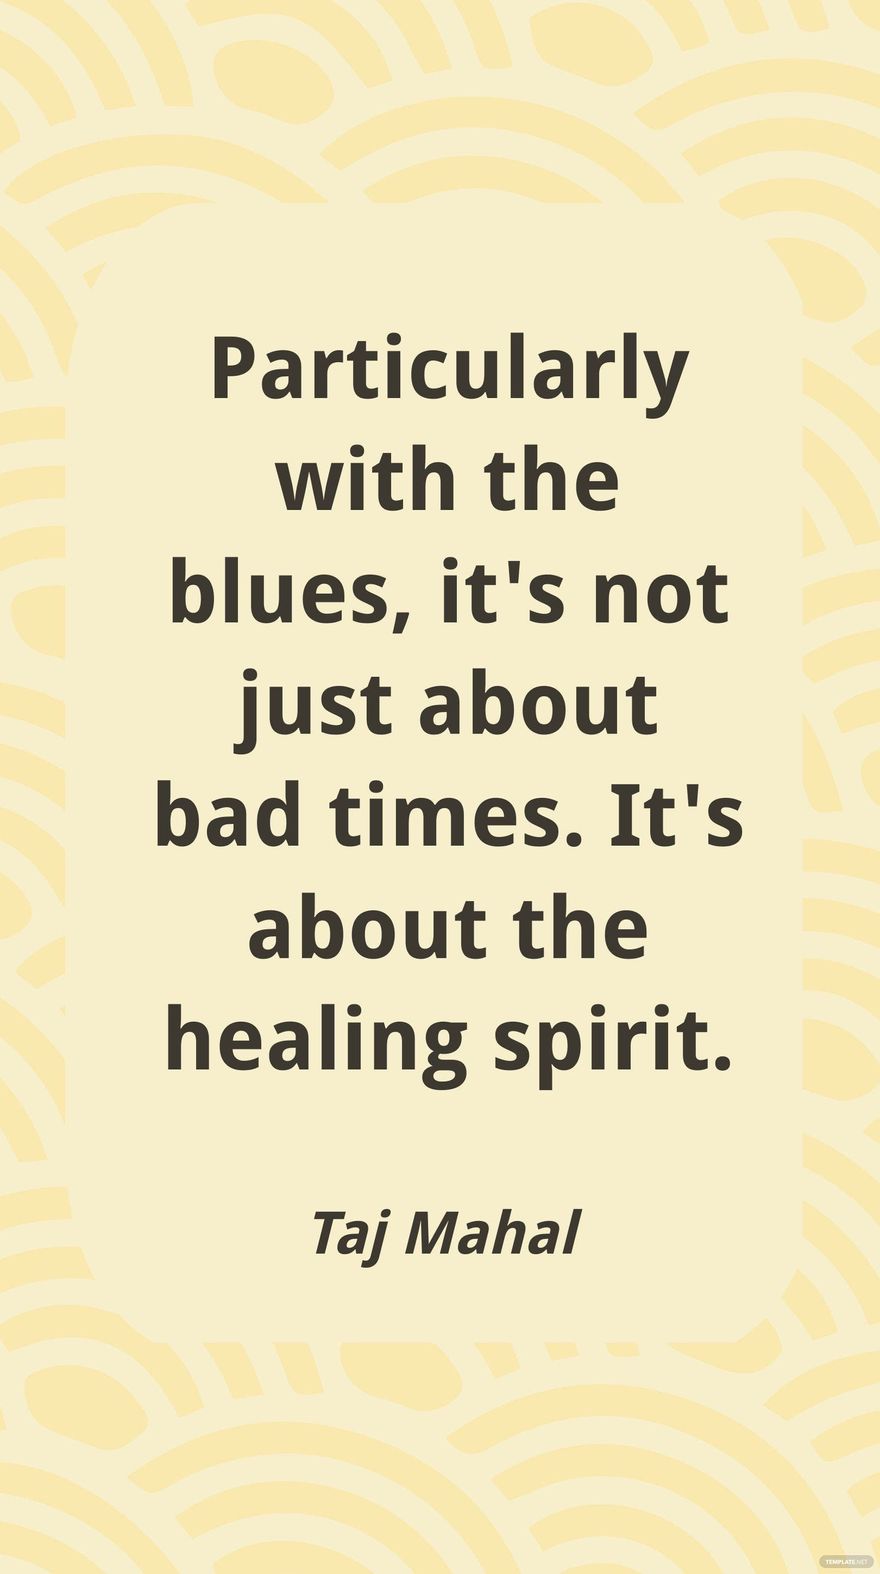 Taj Mahal - Particularly with the blues, it's not just about bad times. It's about the healing spirit. in JPG